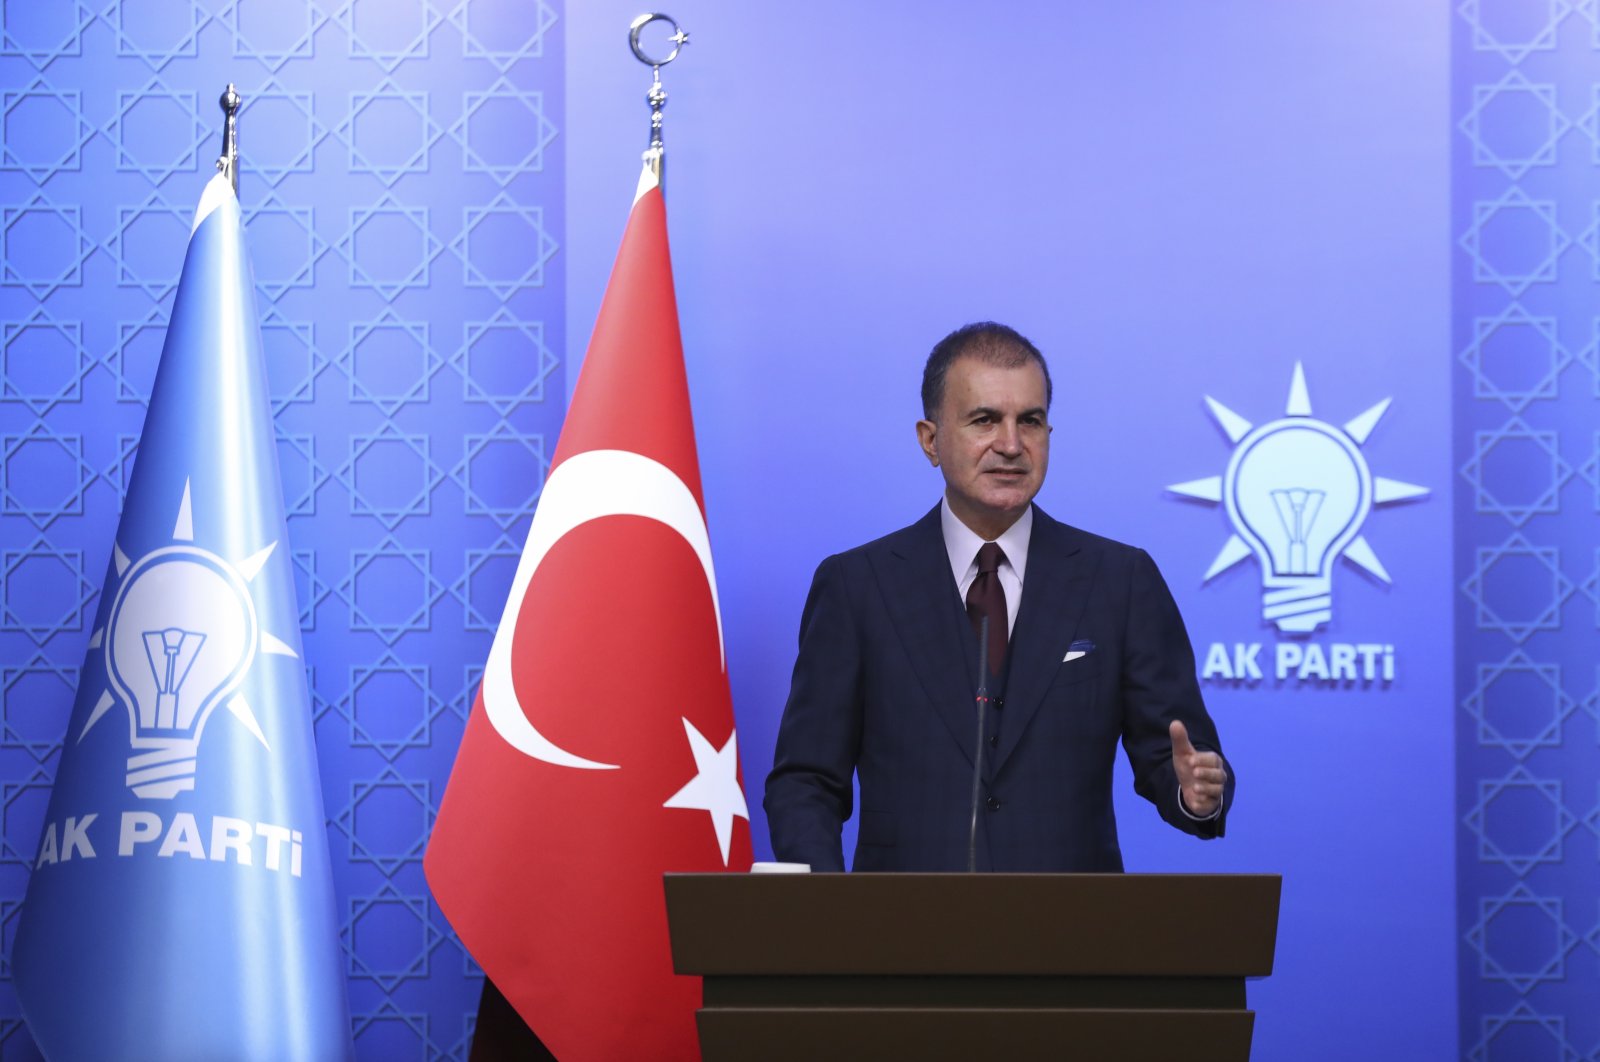 AK Party spokesperson Ömer Çelik speaks at a news conference following a party meeting in the capital Ankara, Wednesday, Dec. 29, 2021. (AA Photo)